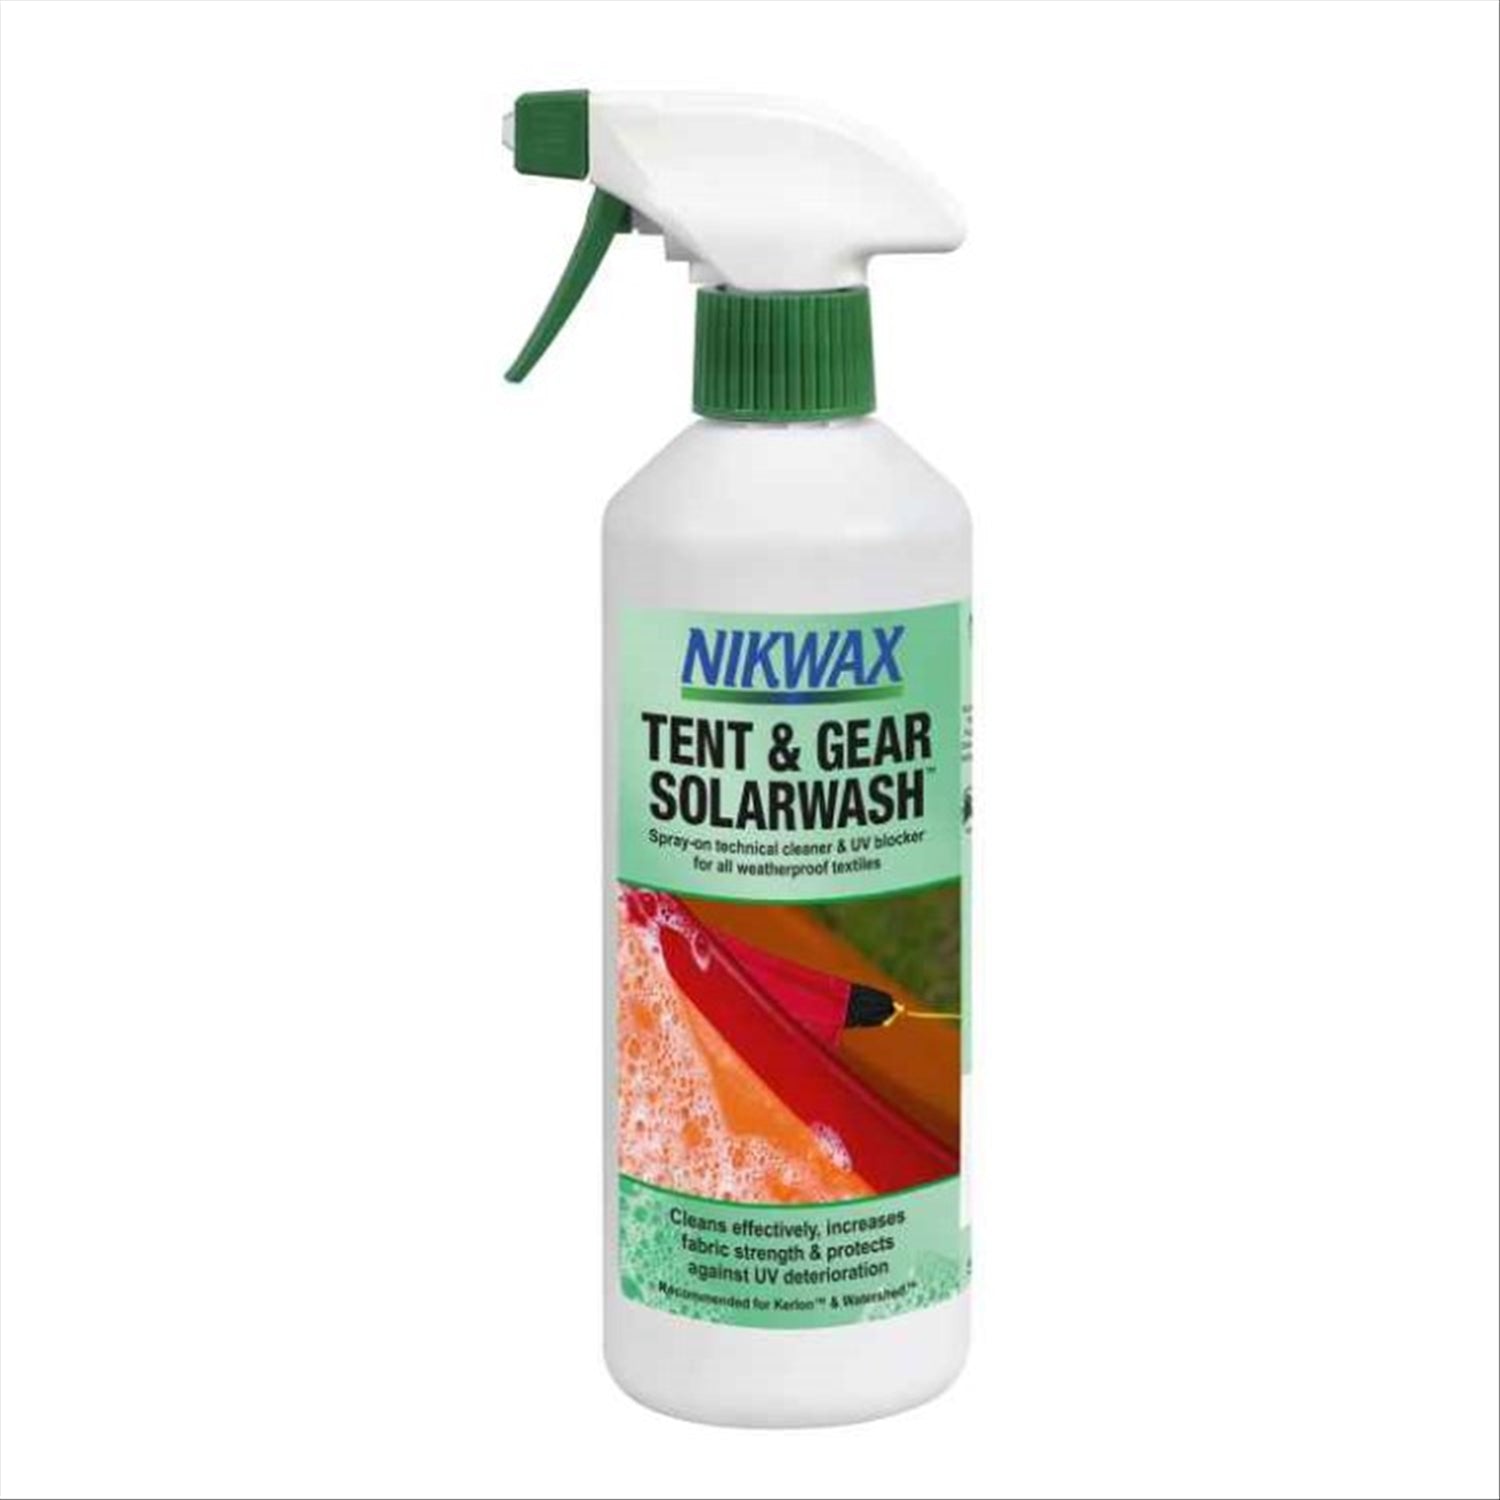 Nikwax Tent & Gear SolarWash Spray-On Cleaner and Protector